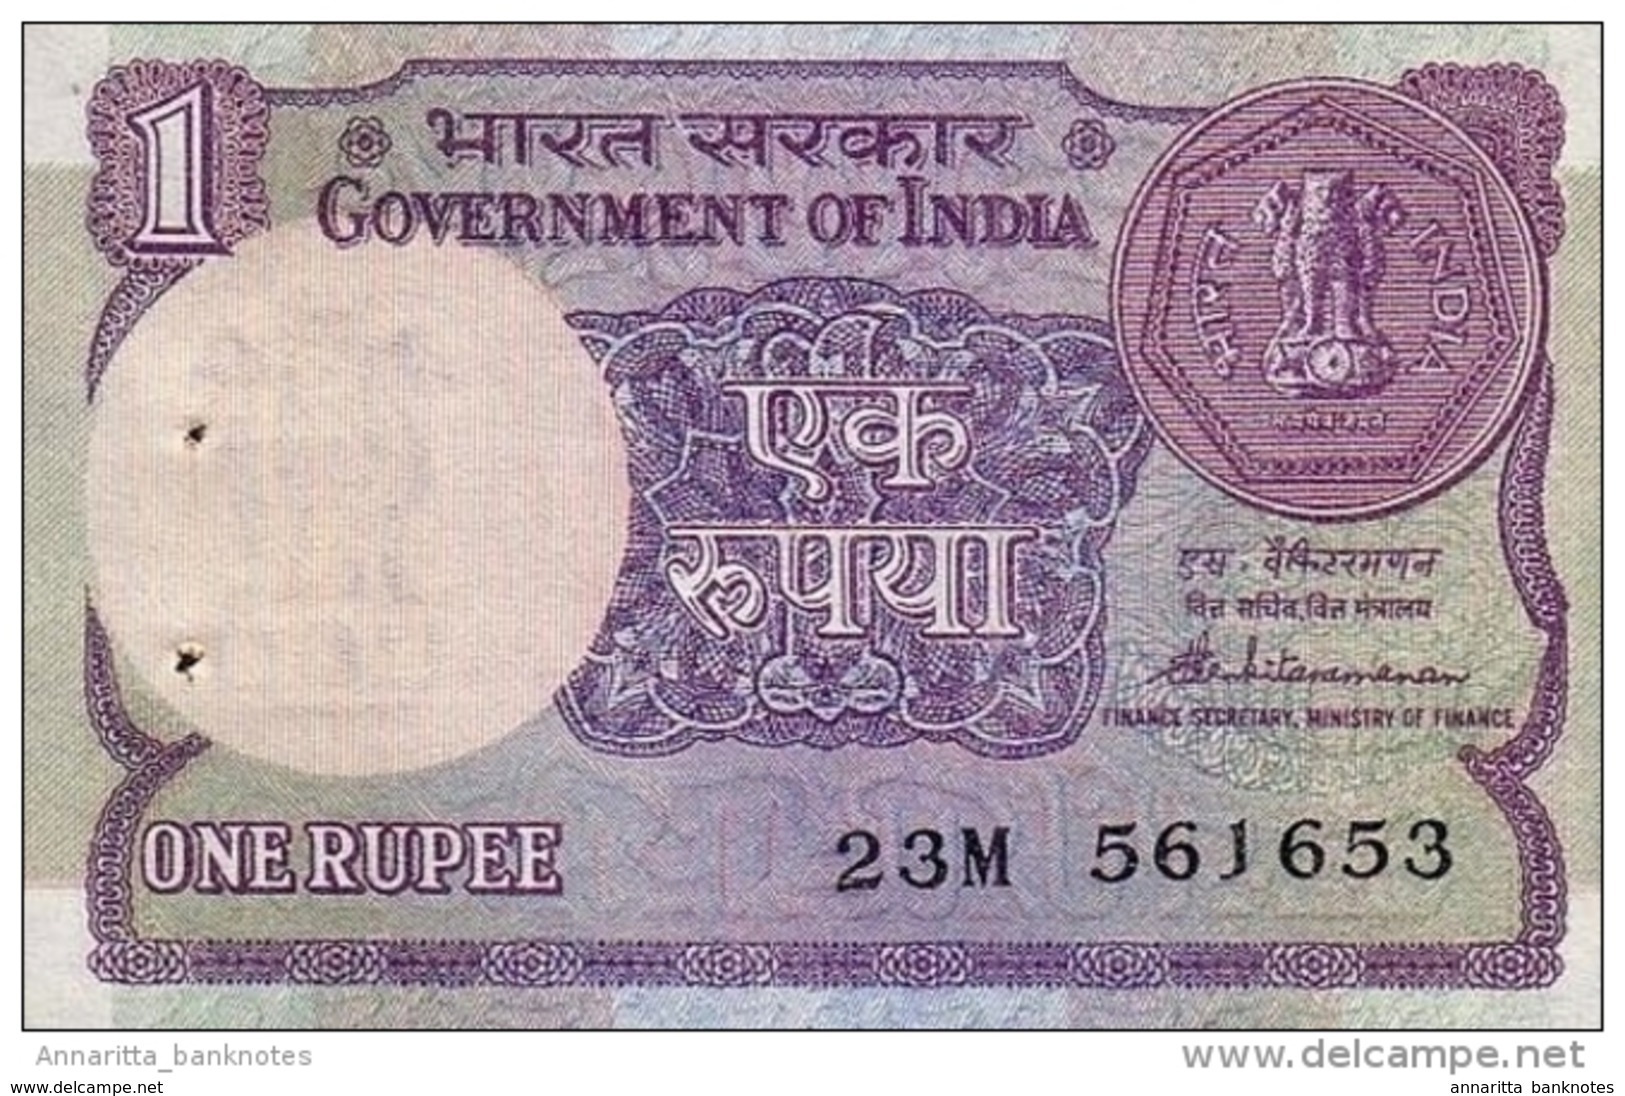 INDIA 1 RUPEE 1985 P-78Ab UNC SIGN. VENKITARAMANAN. NO PLATE LETTER [IN078Ab] - Inde